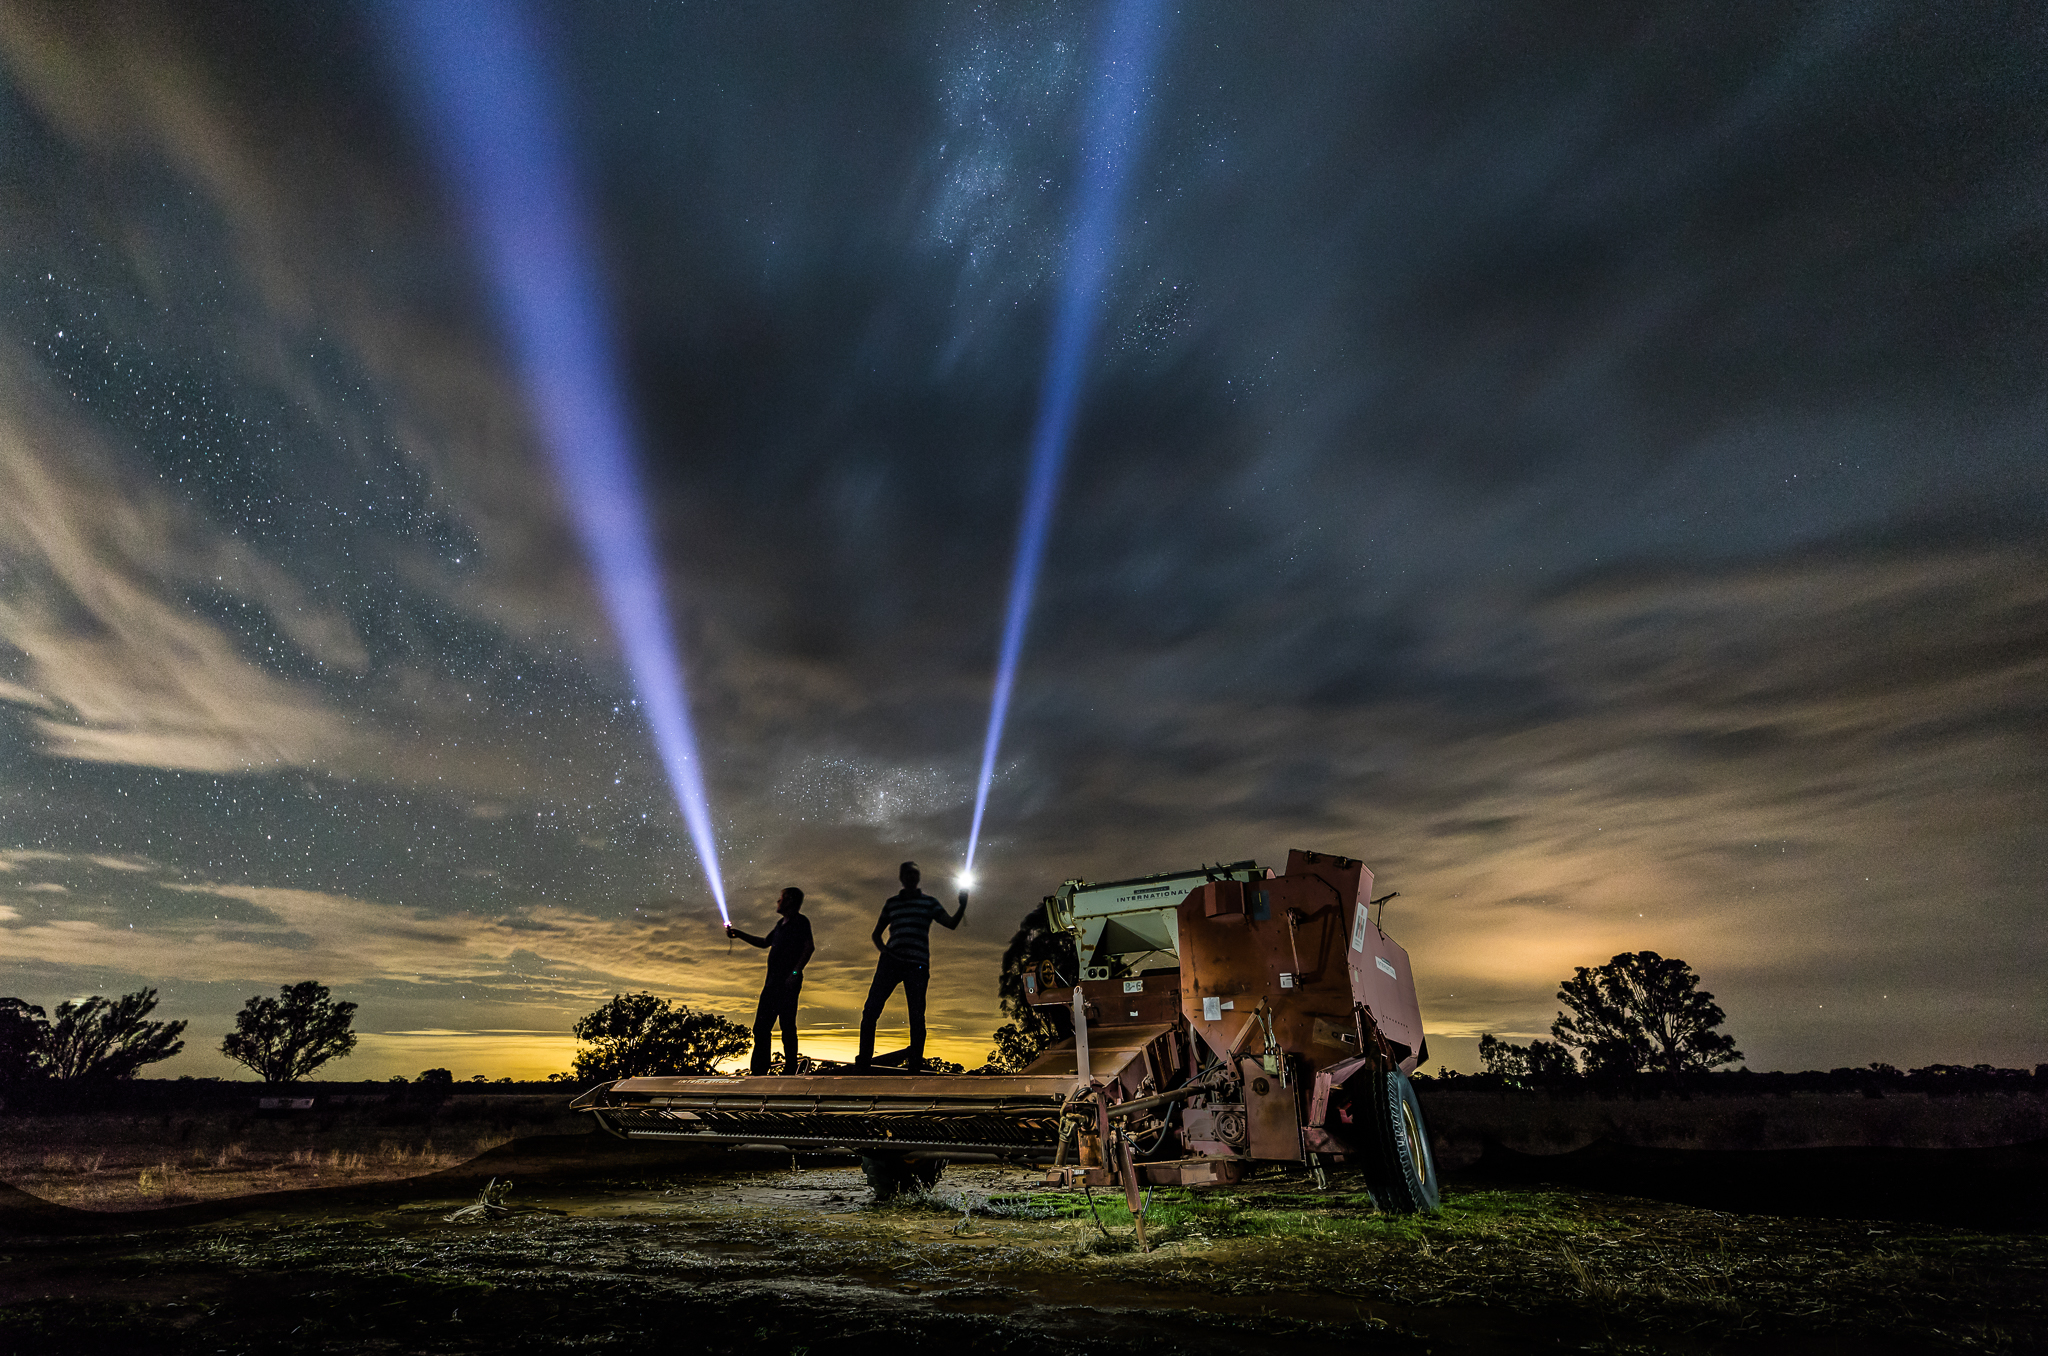 Figure 10 - Light painted Harvester with a sky background - People with a torch pointing to the sky as added interest. (I’m on the left keeping still for 20s exposure with Richard Tatti on the right)